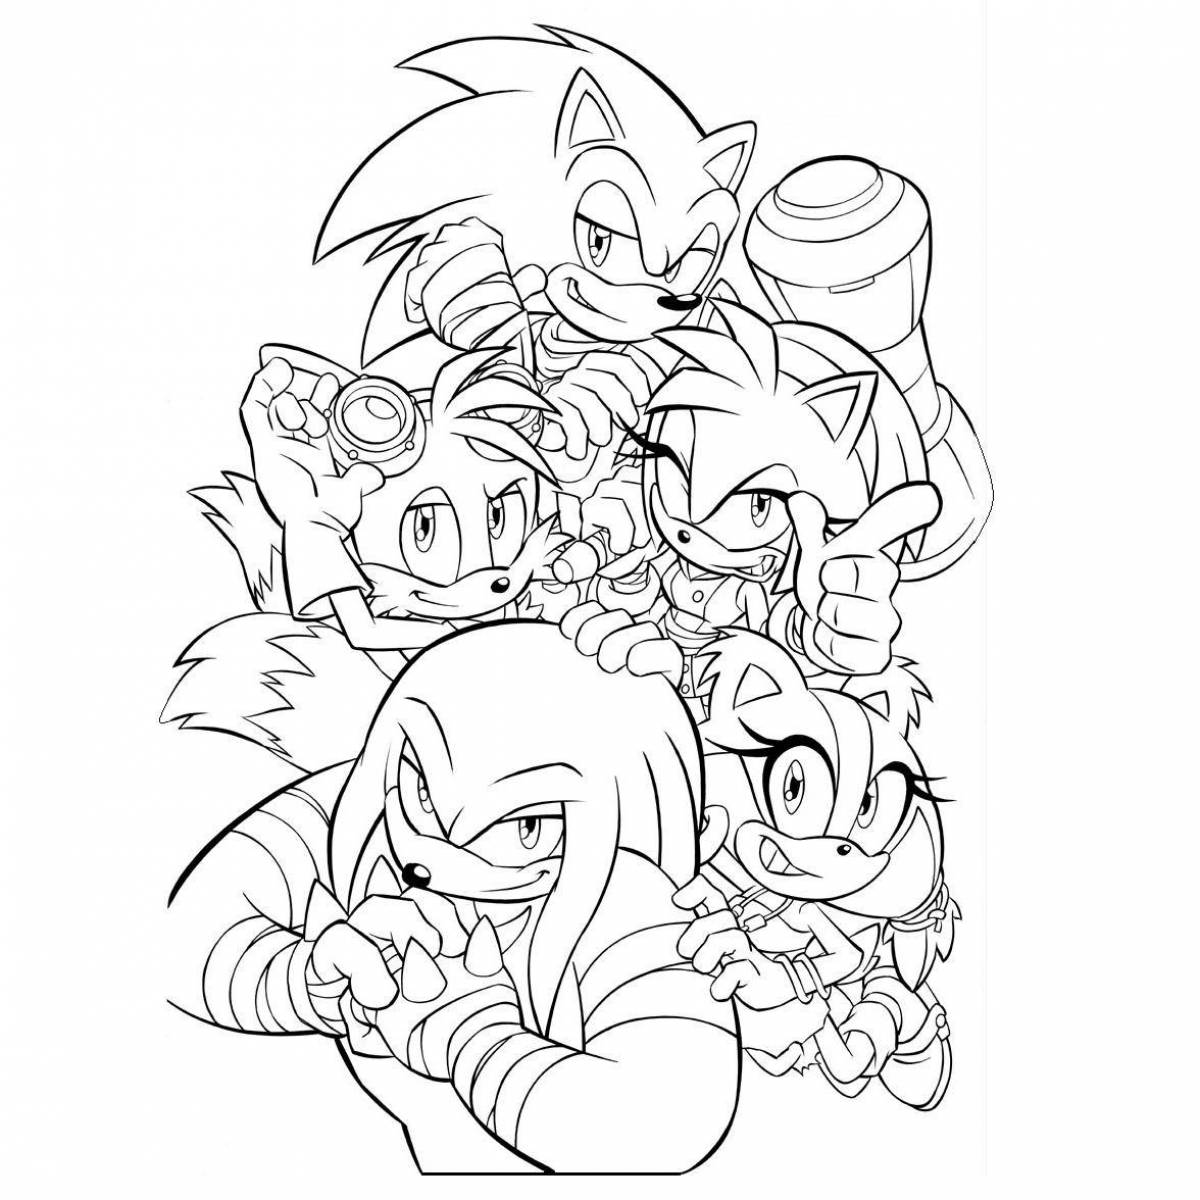 Sonic team bright coloring